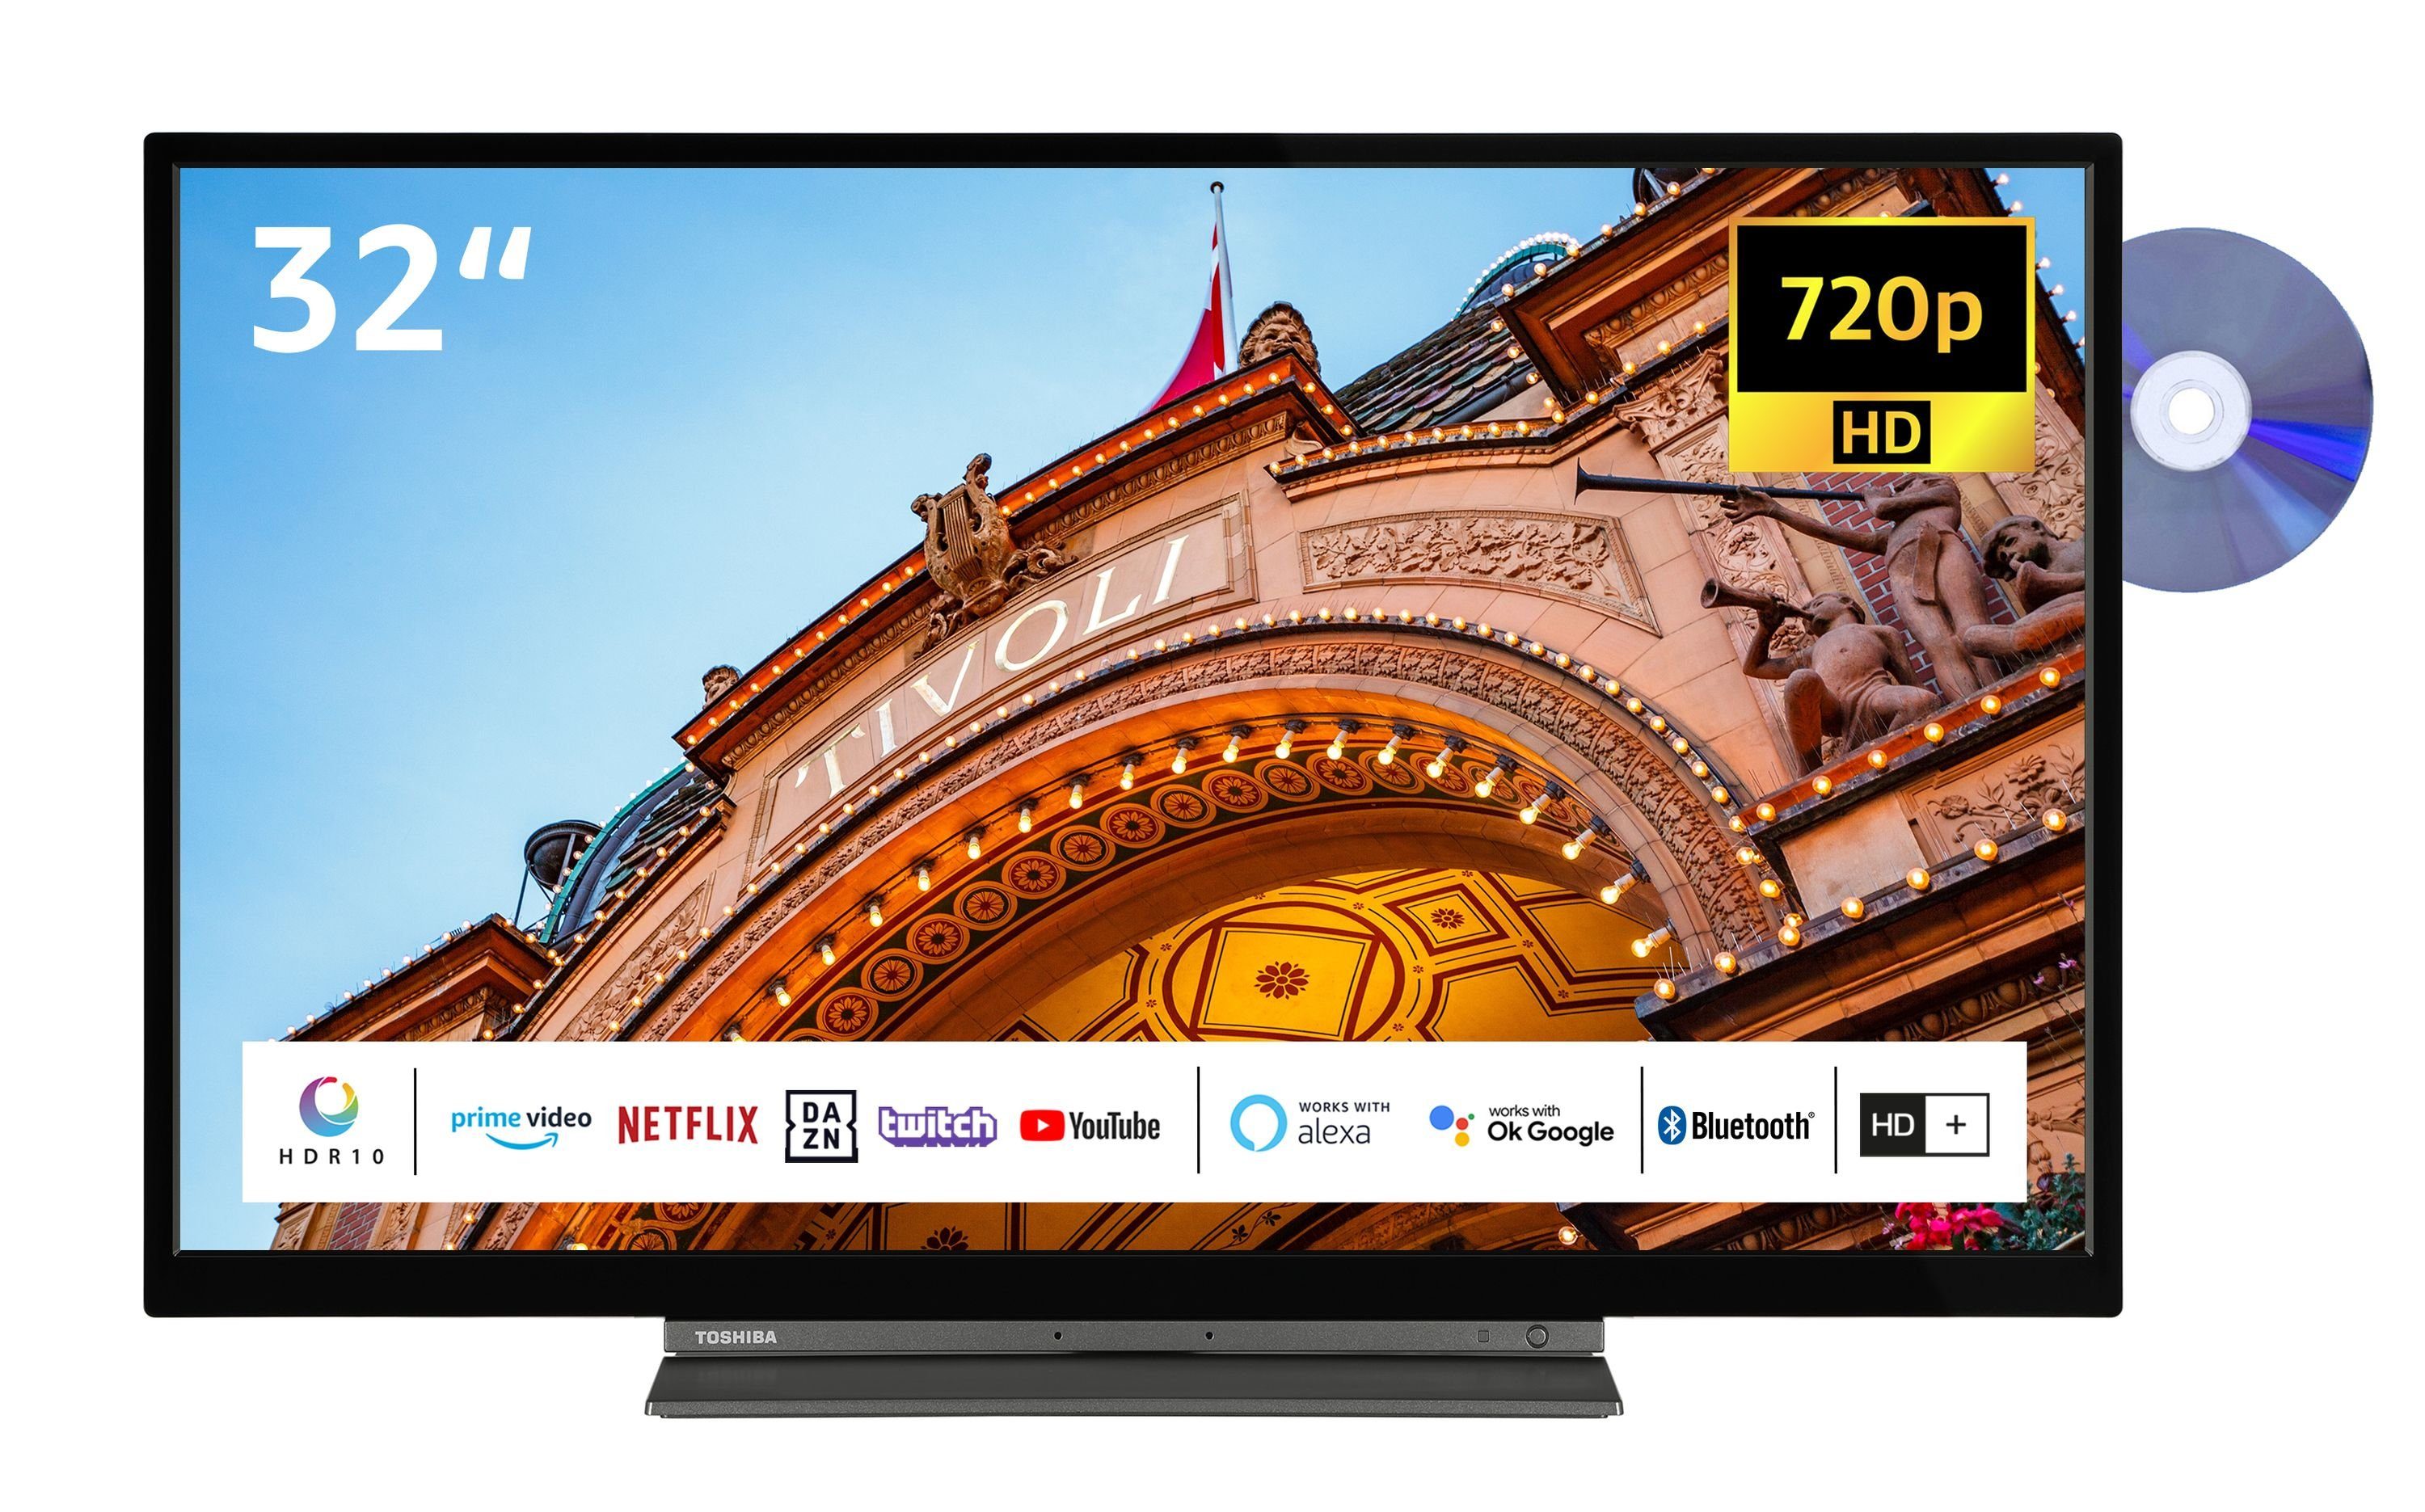 Toshiba 32WD3C63DAY/2 Triple-Tuner, Smart 6 HD-ready, Monate (80 LCD-LED HD+ inklusive) HDR, DVD-Player, TV, Fernseher cm/32 Zoll